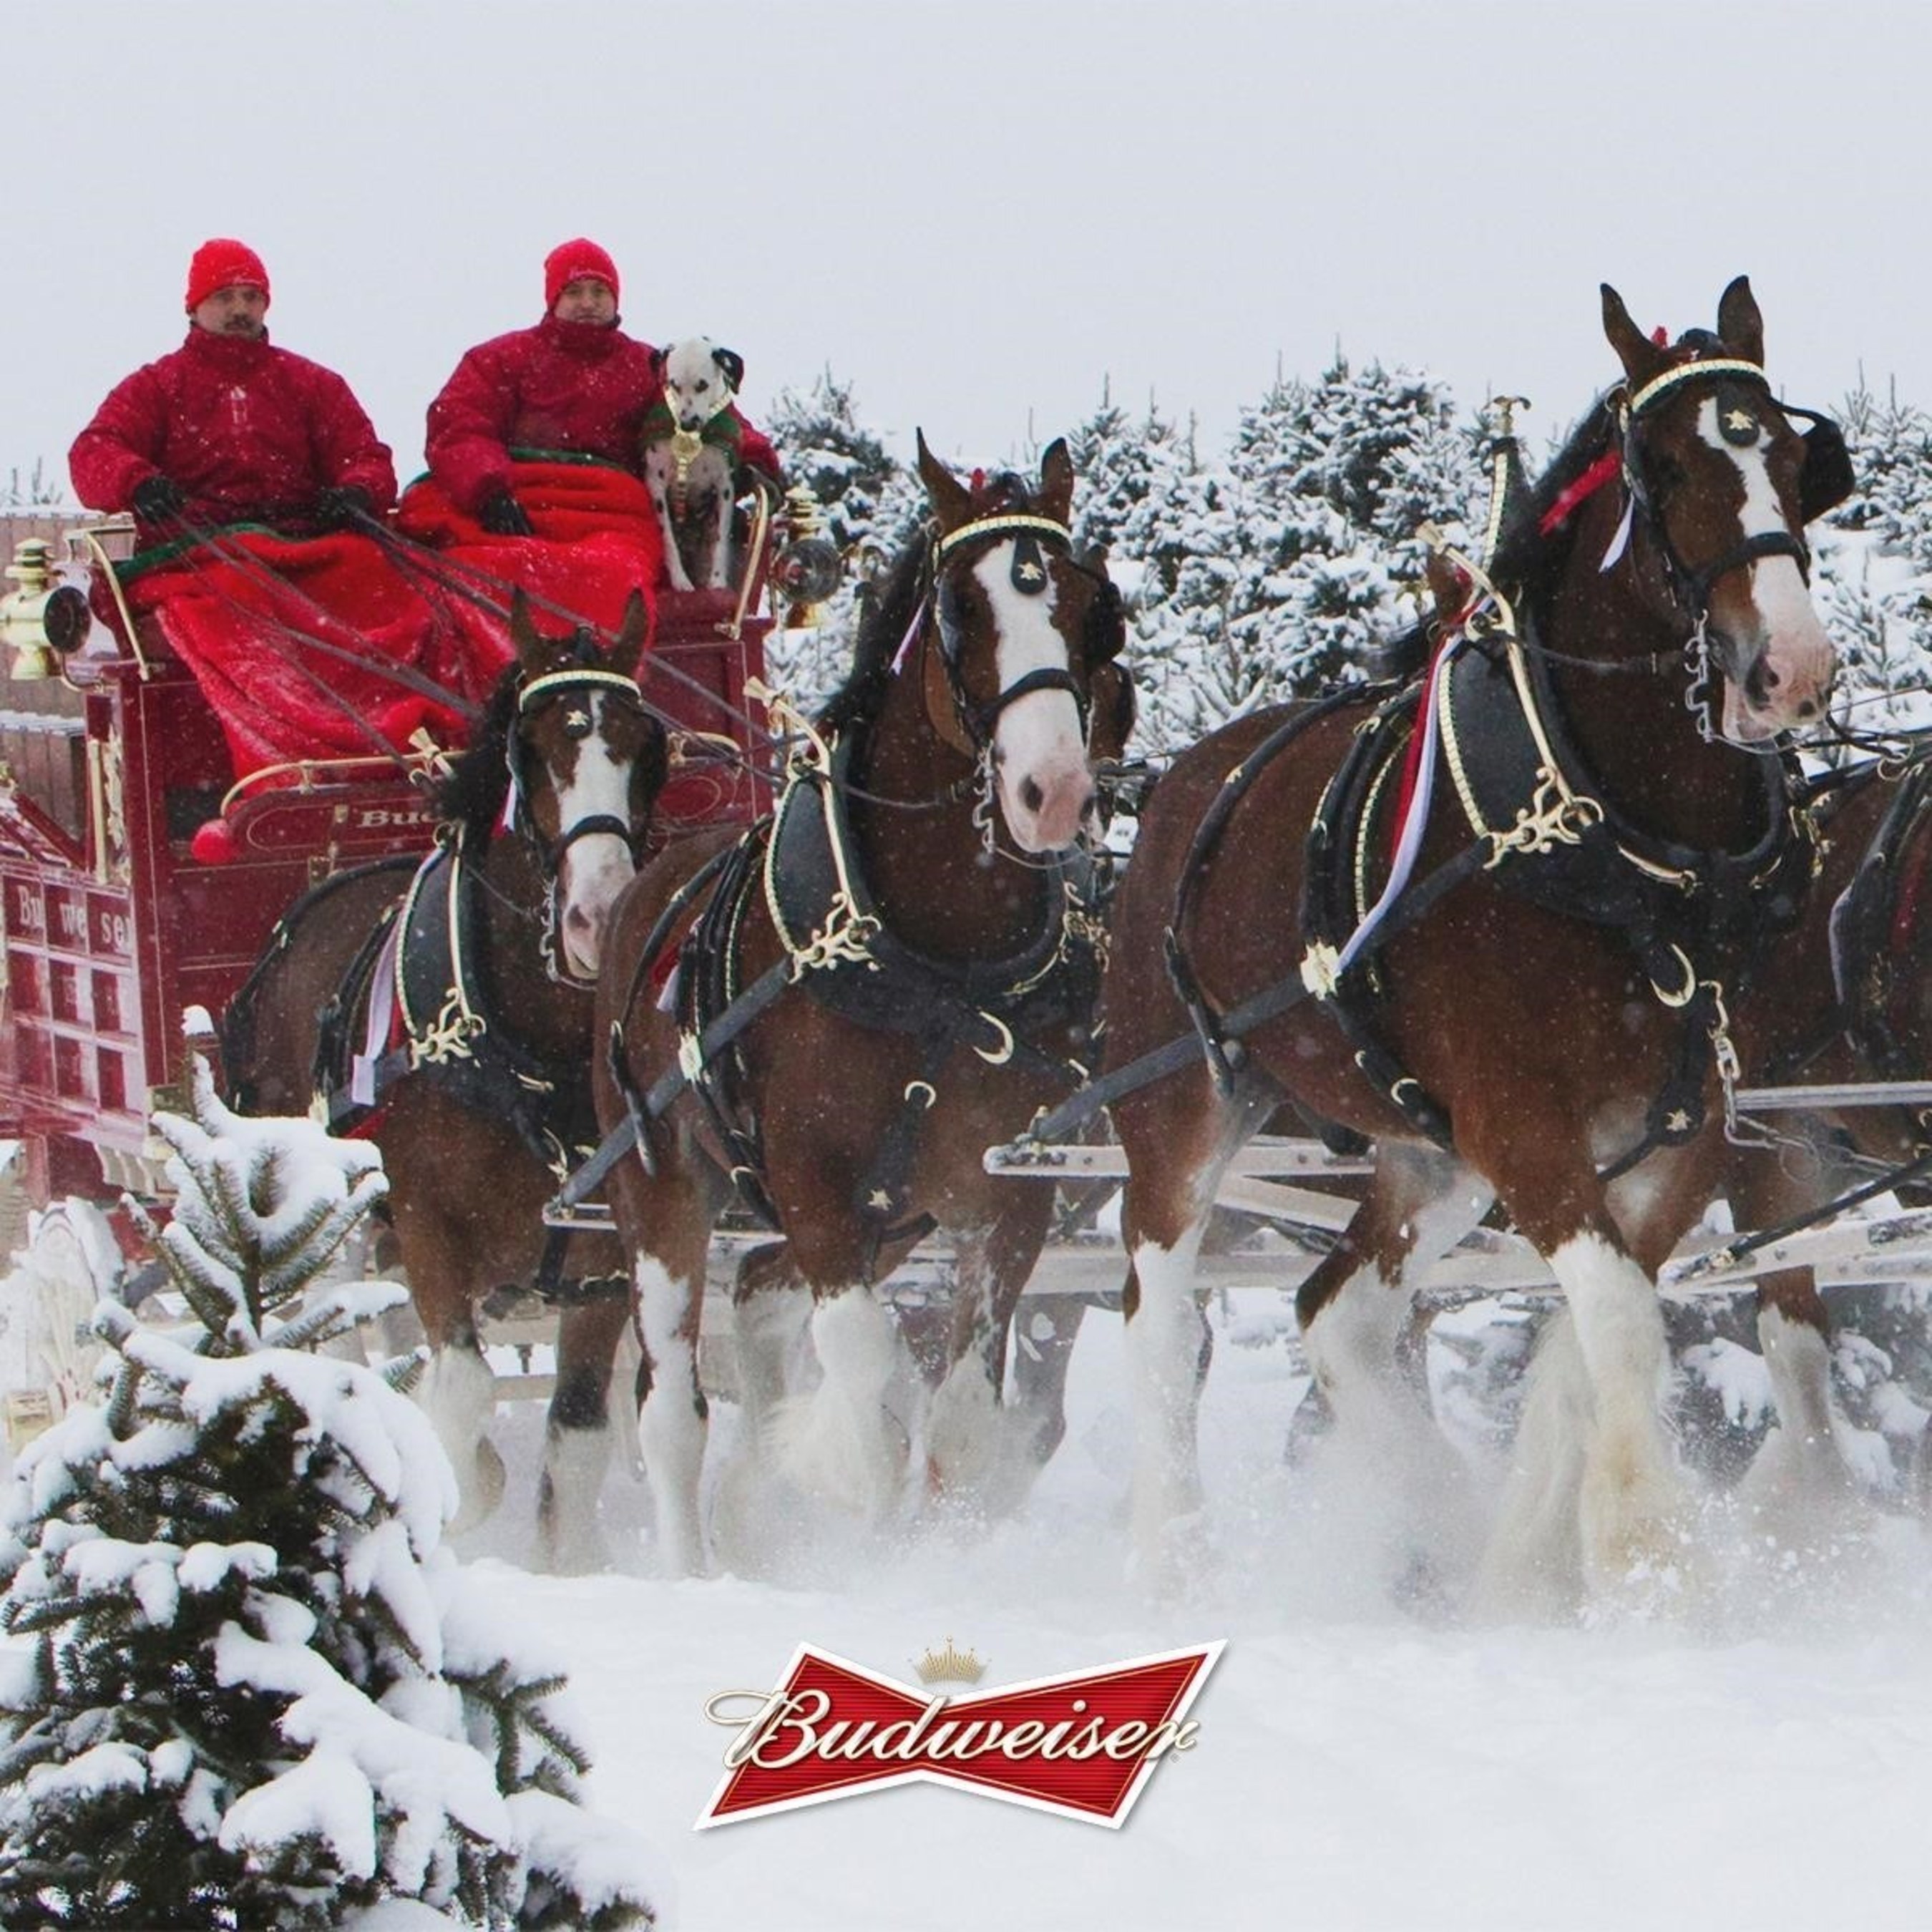 Don't believe everything that trends: the Budweiser Clydesdales aren't going anywhere.